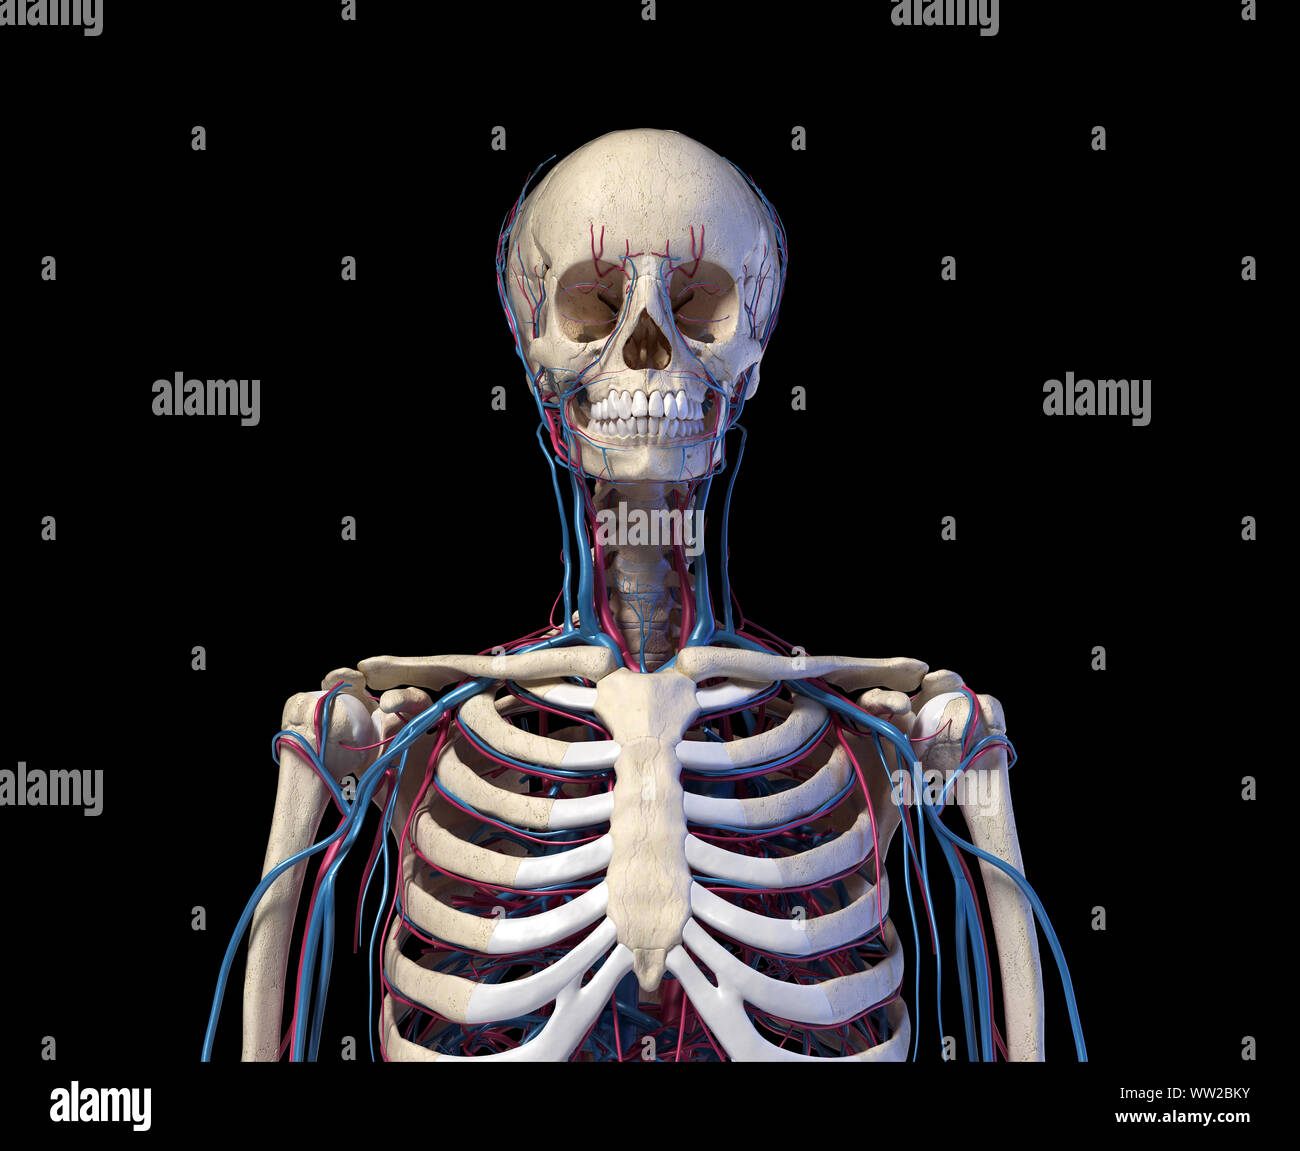 Human anatomy. Skeleton of the torso with veins and arteries. Front view. On black background. 3d illustration. Stock Photo